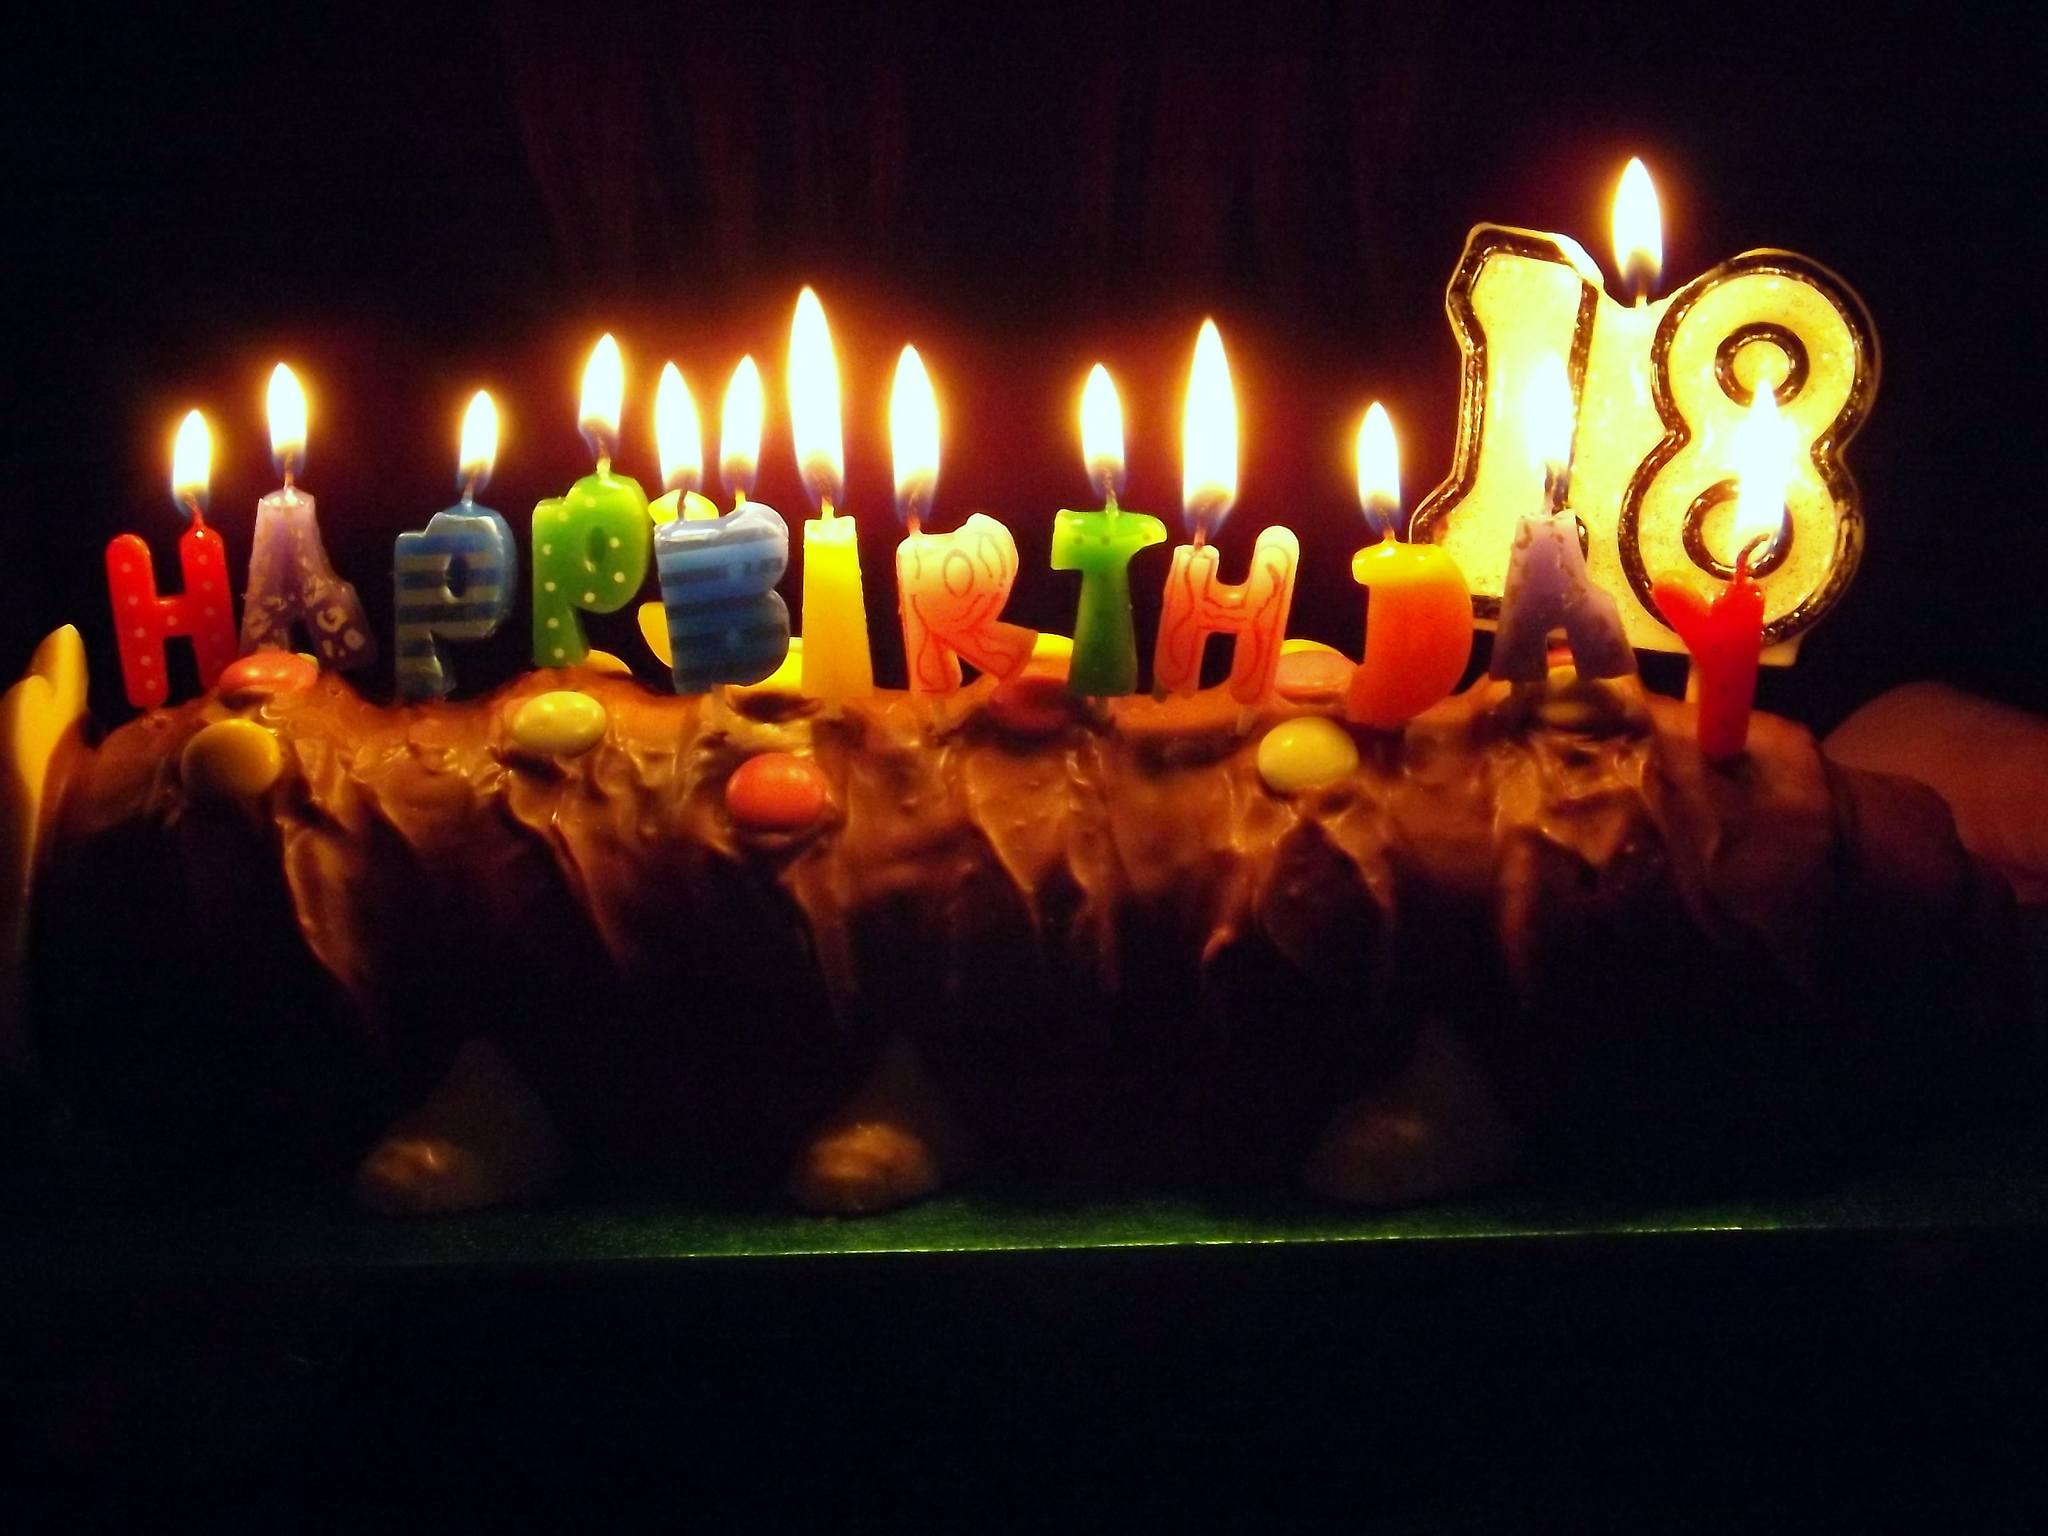 18 Things You Should Learn by the Time You Turn 18